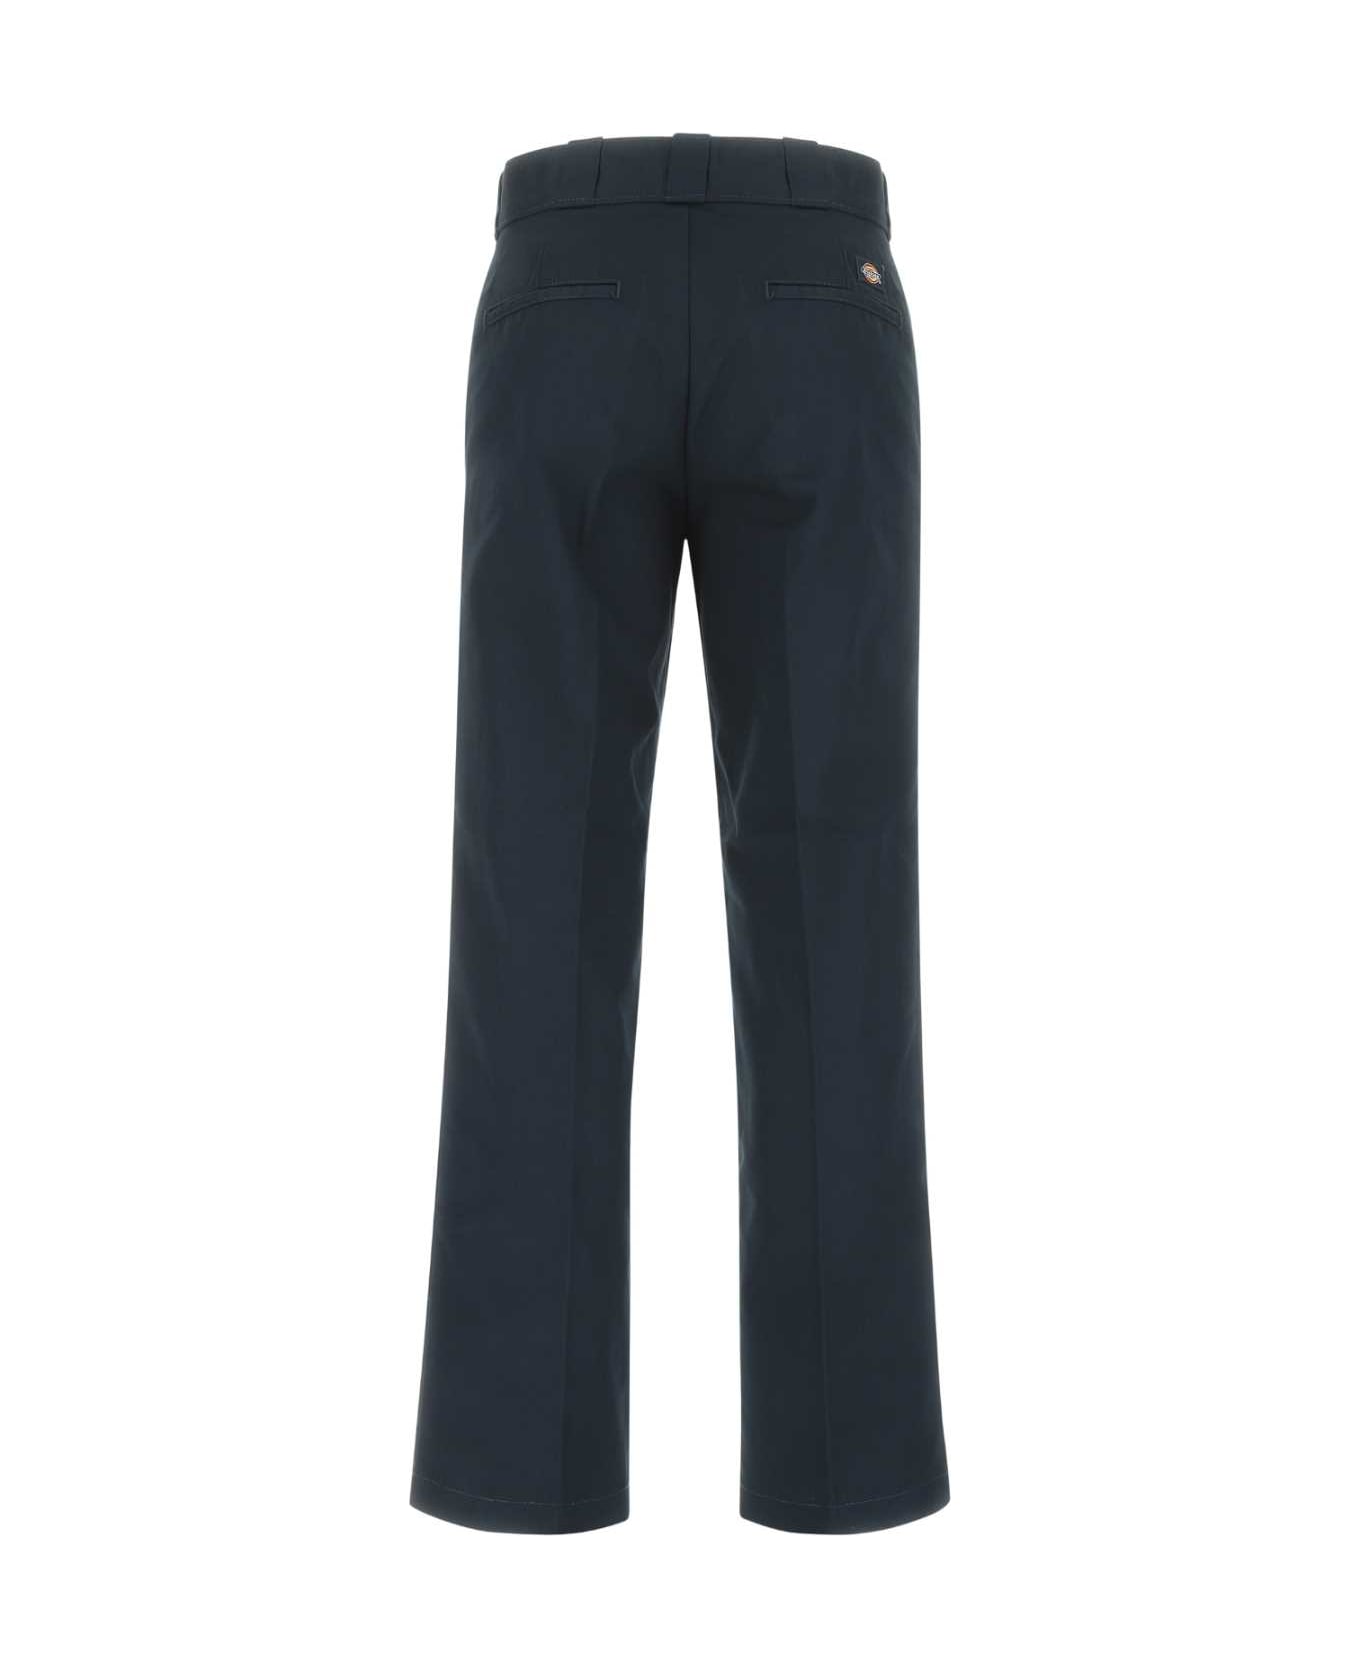 Dickies Midnight Blue Polyester Blend Pant - DNX1